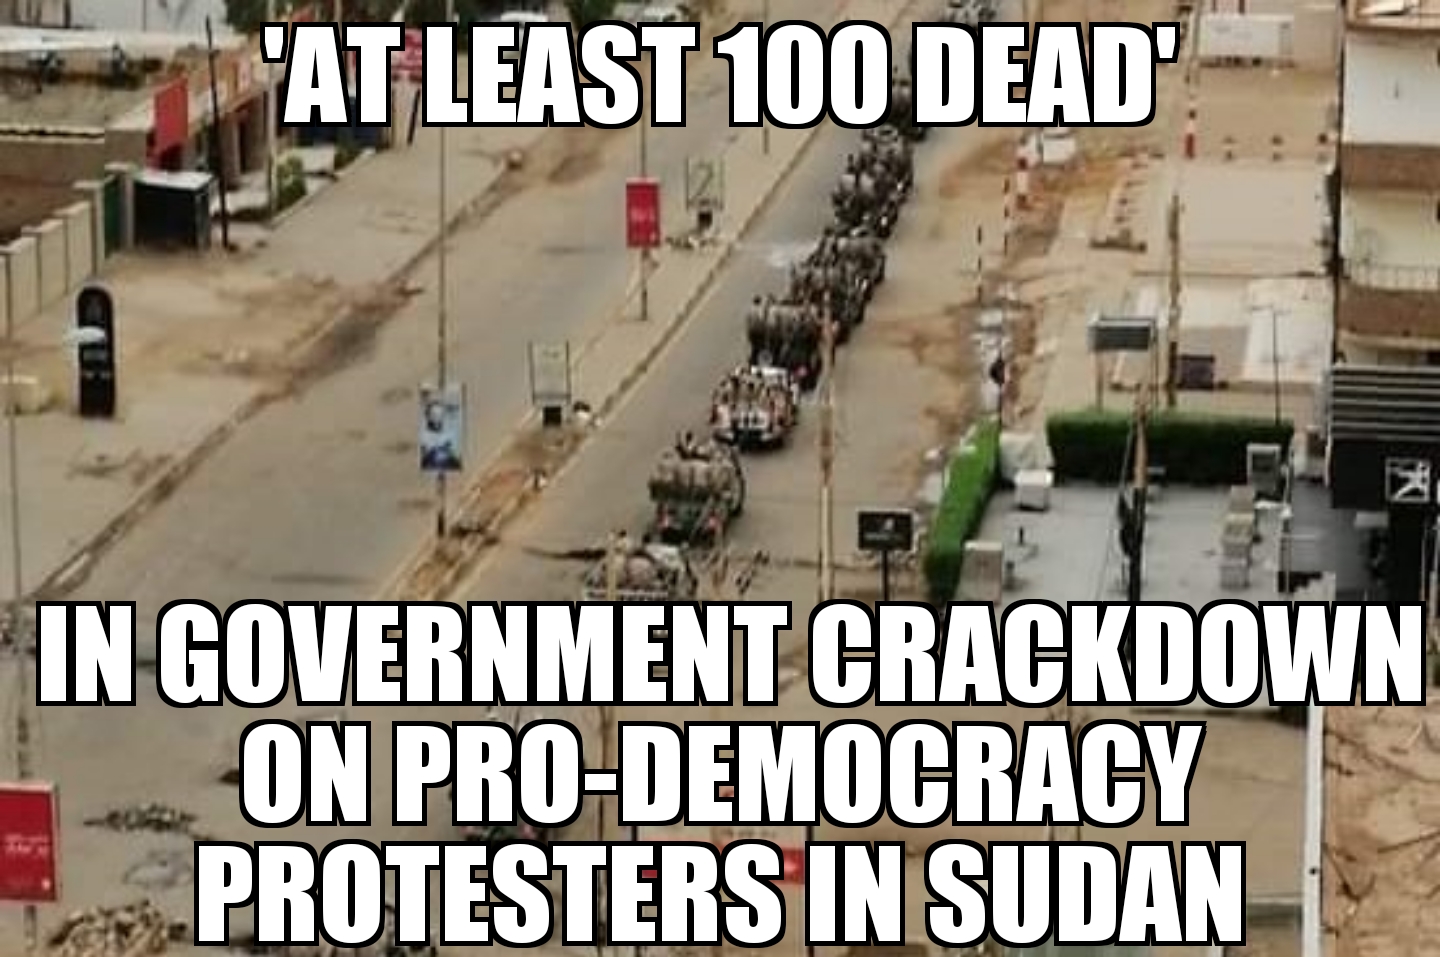 ‘At least 100 dead’ in Sudan crackdown on pro-democracy protesters